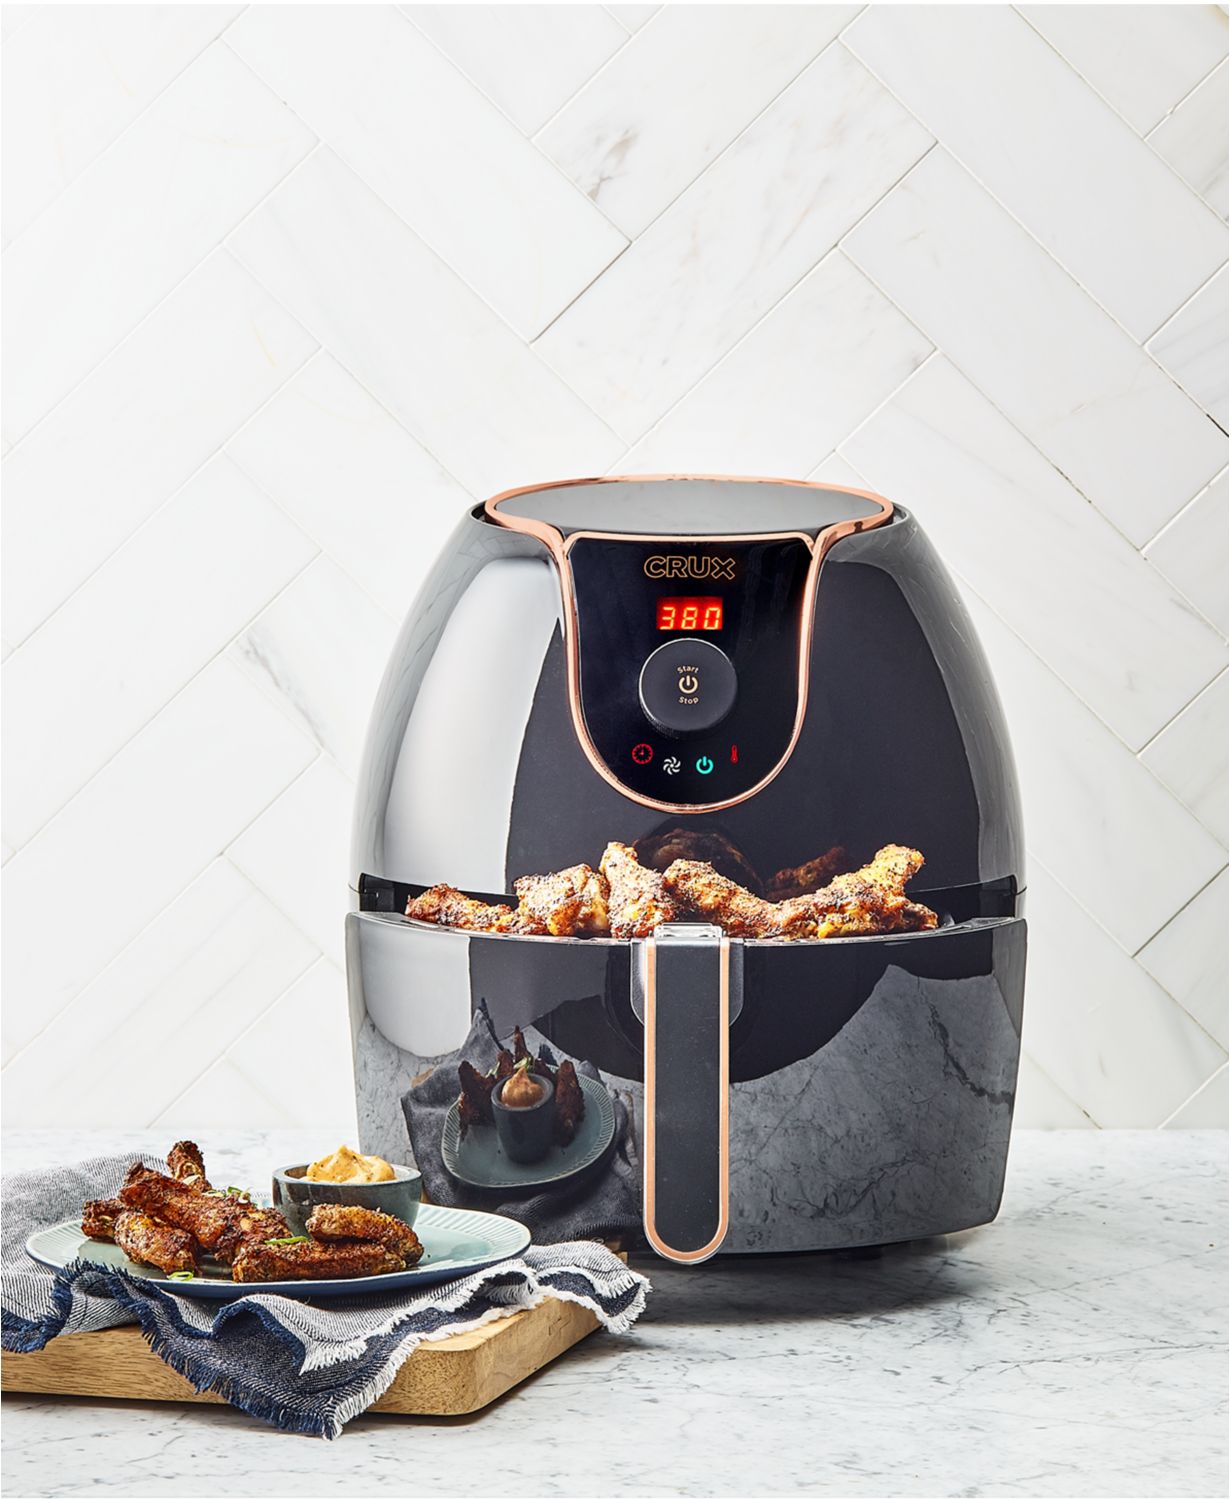 crux-5-3-qt-digital-air-convection-fryer-14720-created-for-macy-s